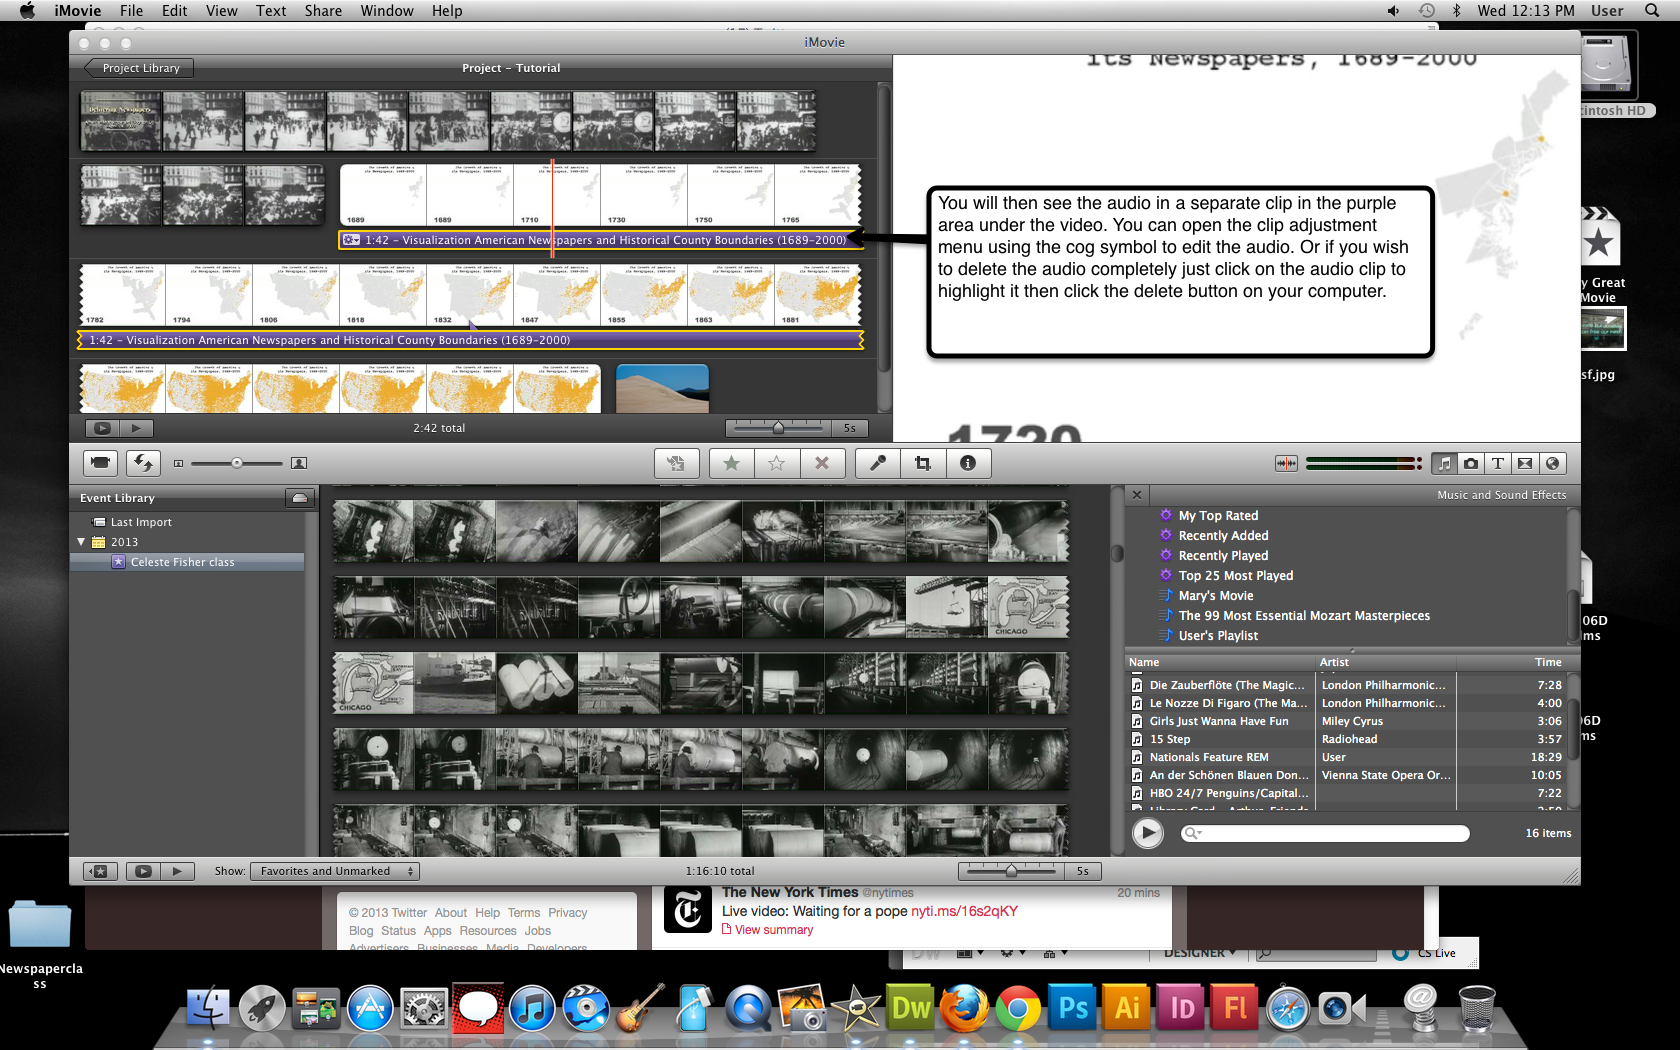 Visual guide to editing audio in iMovie '11